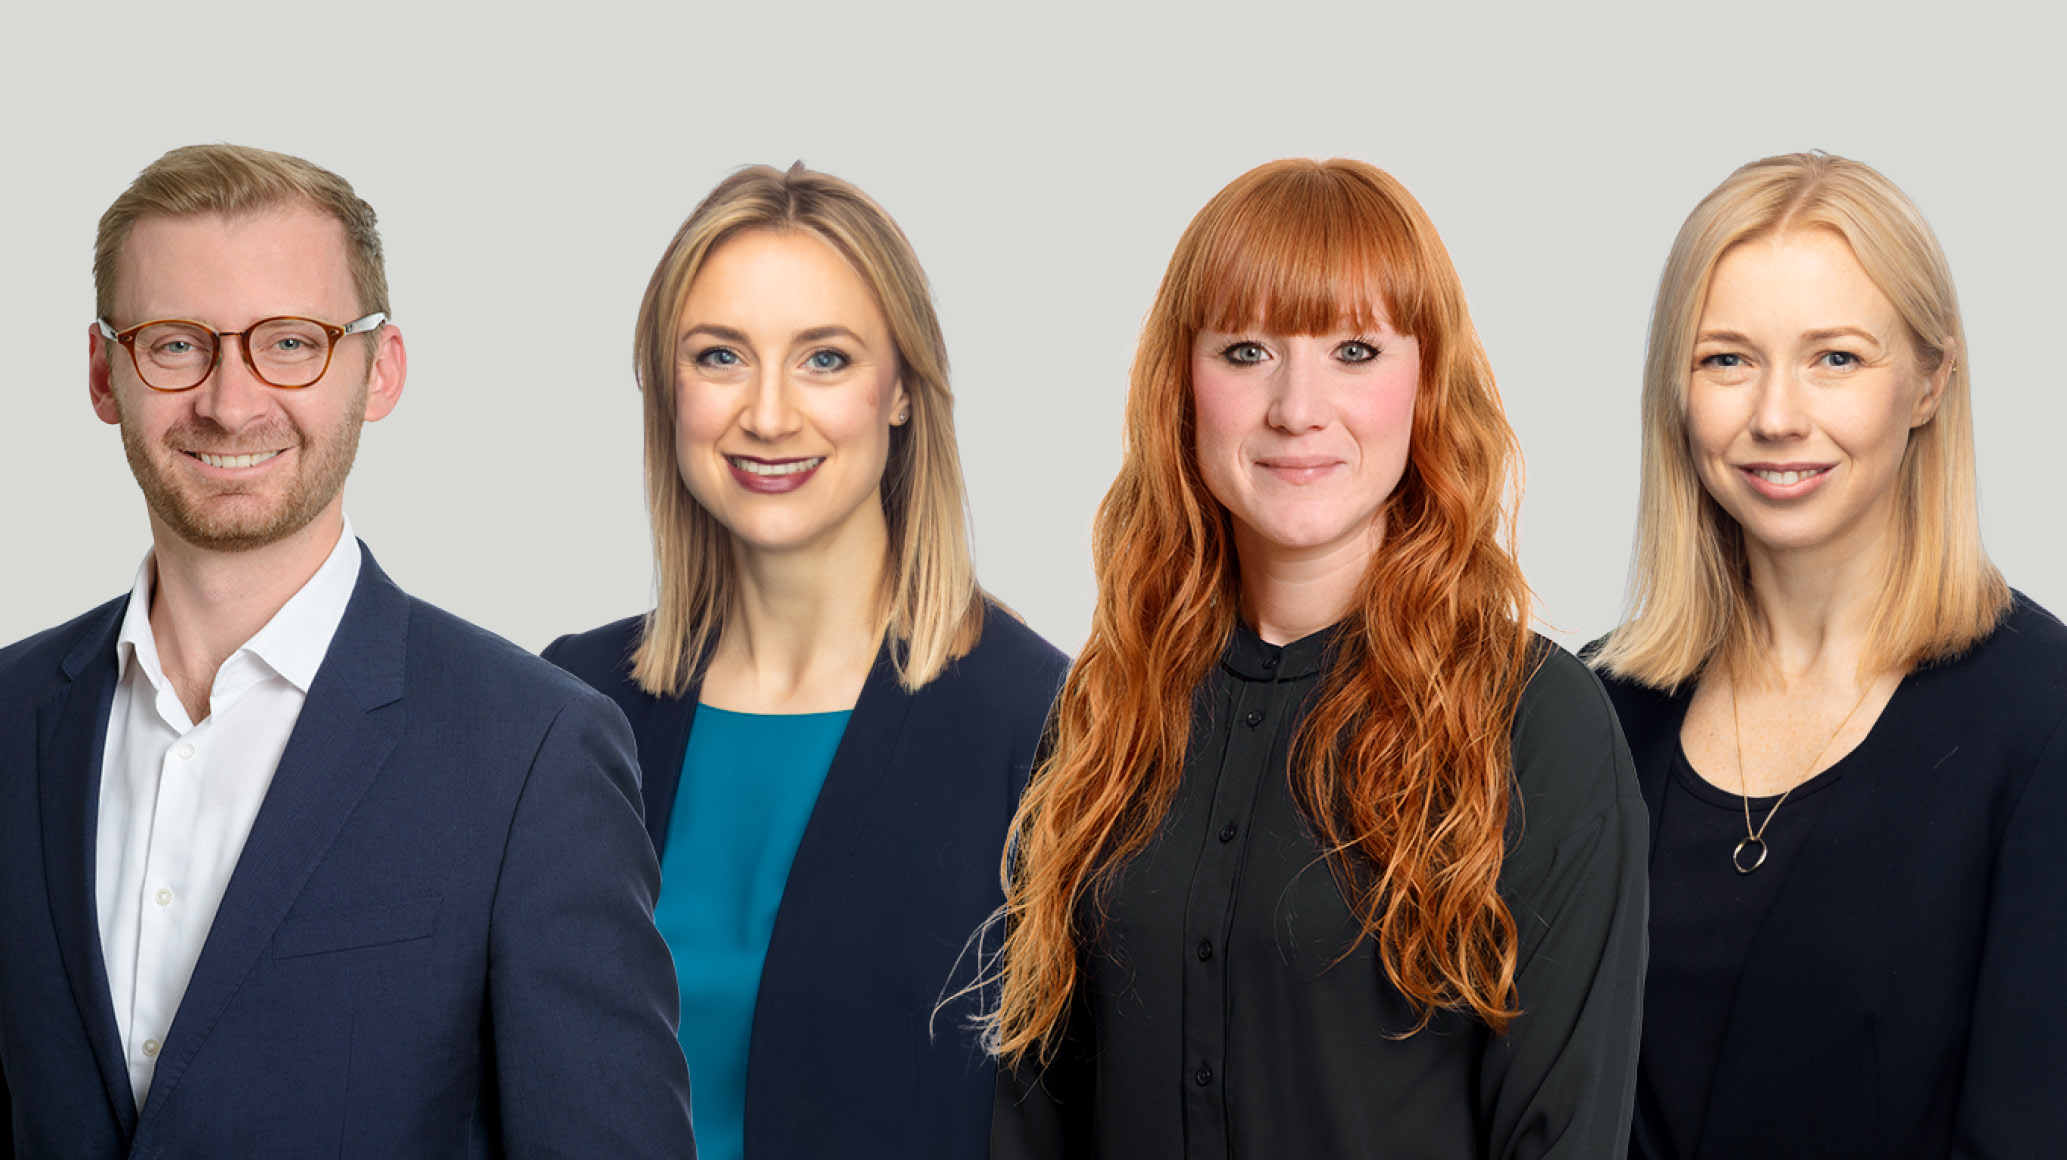 Taylor Wessing announces 14 senior promotions in the UK, including four to partnership